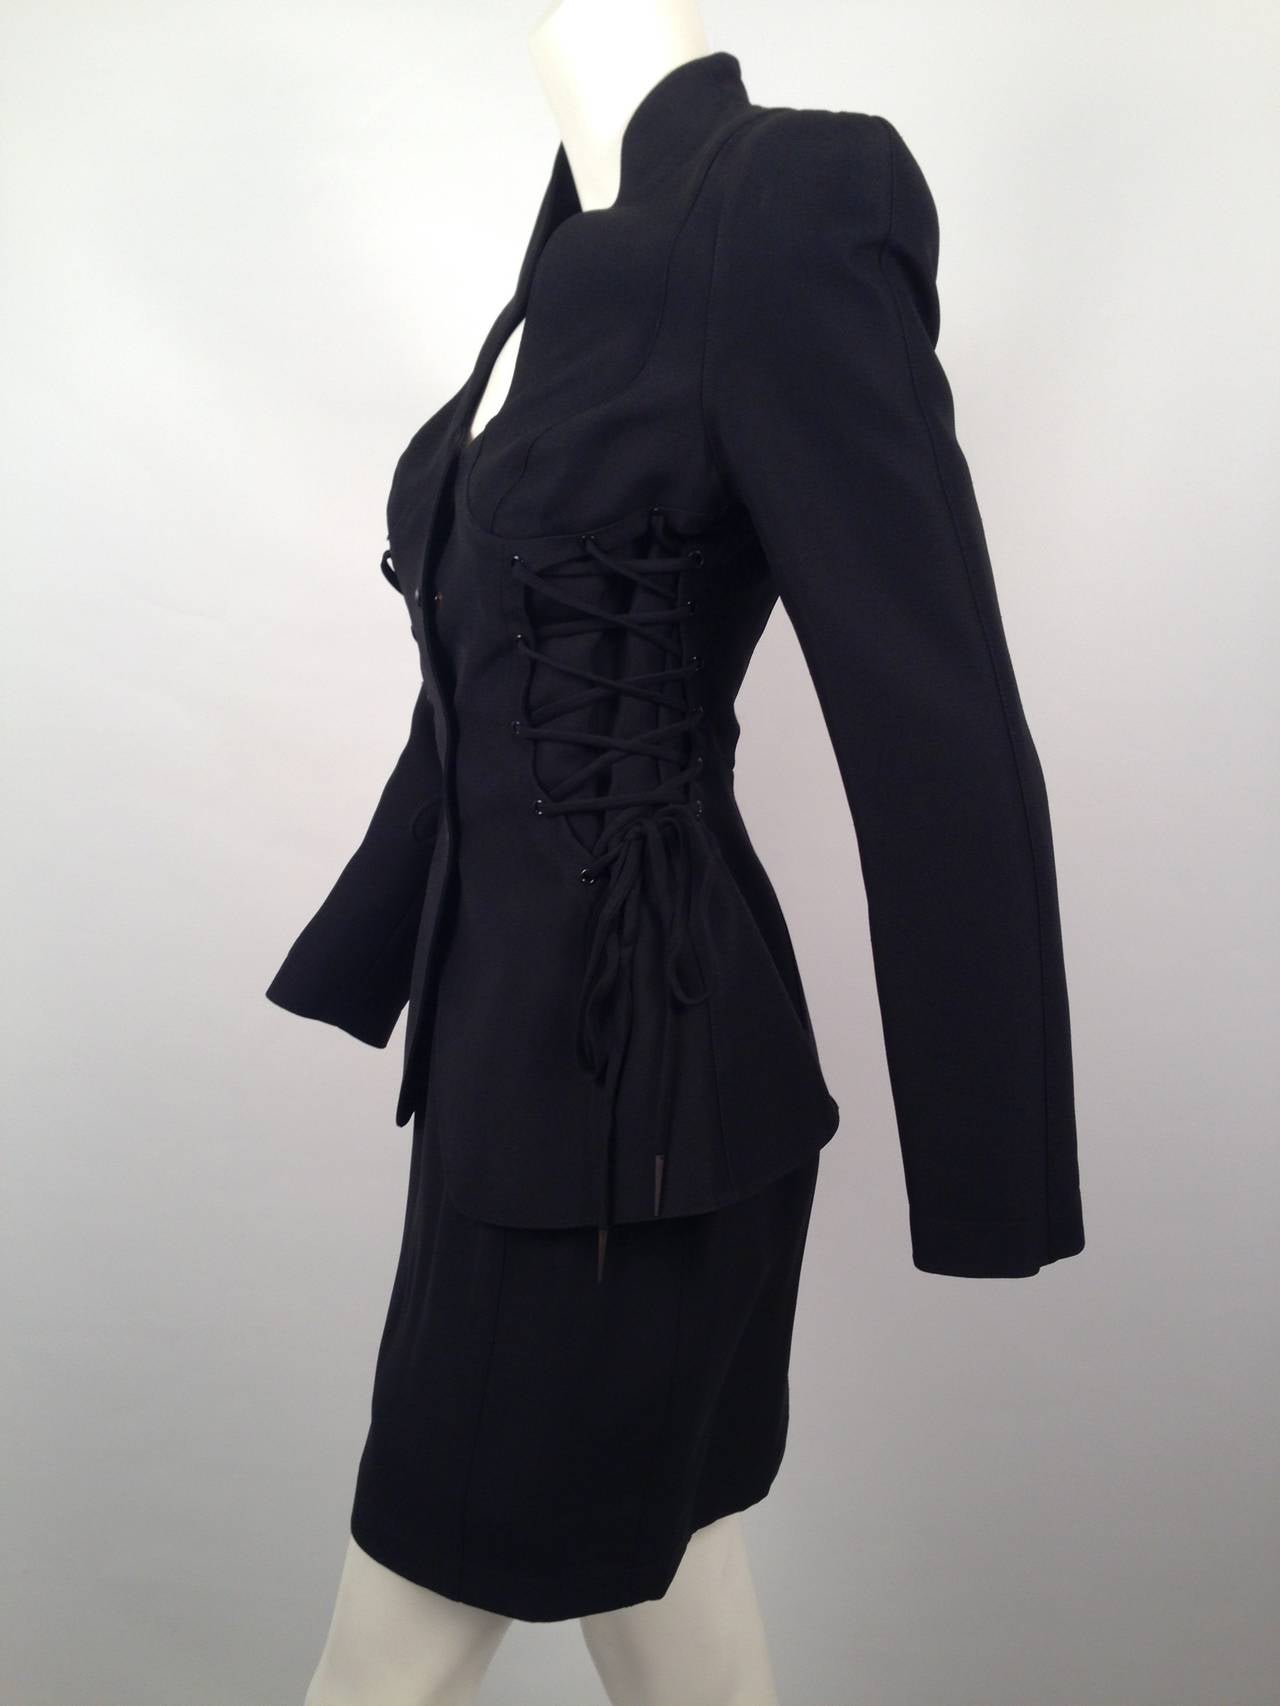 Vintage Thierry Mugler Black Suit With Corseted Jacket For Sale 1